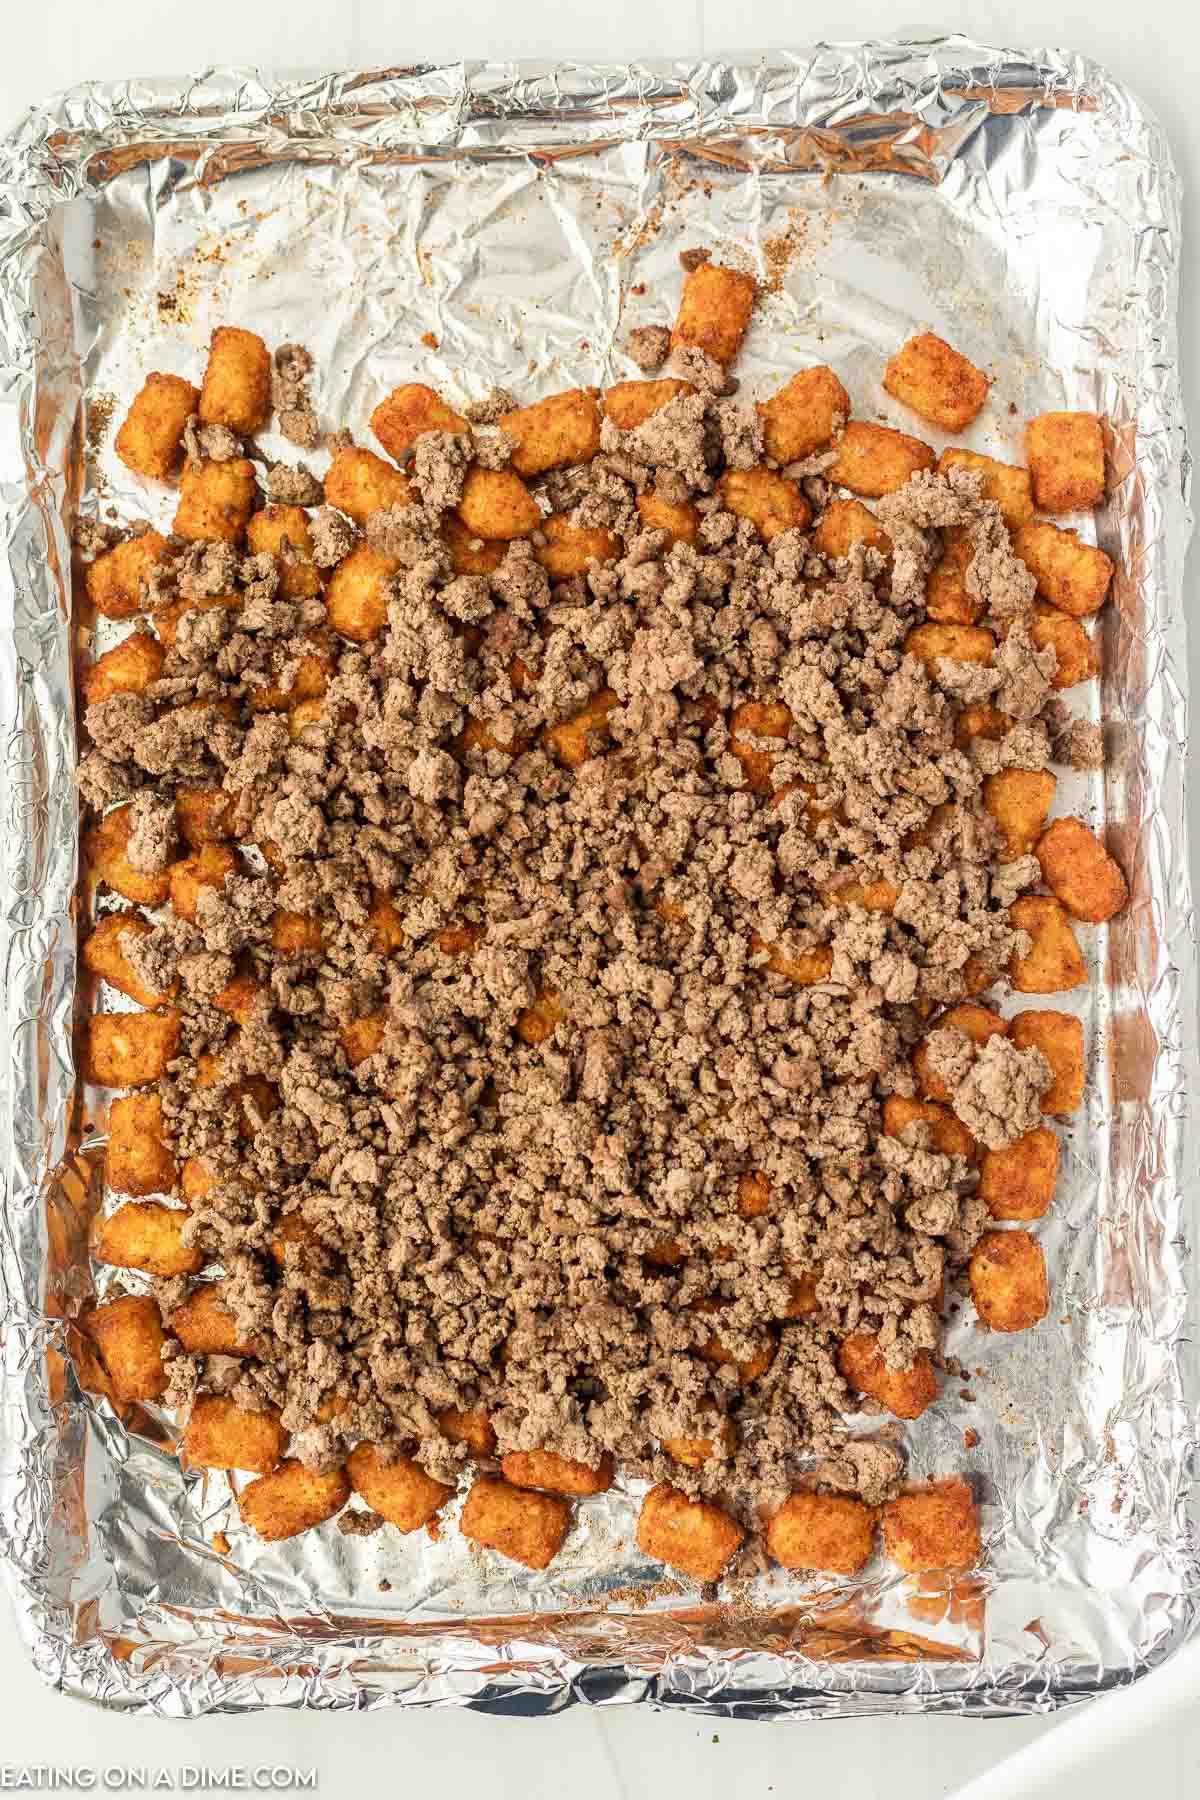 top the tator tots with ground beef